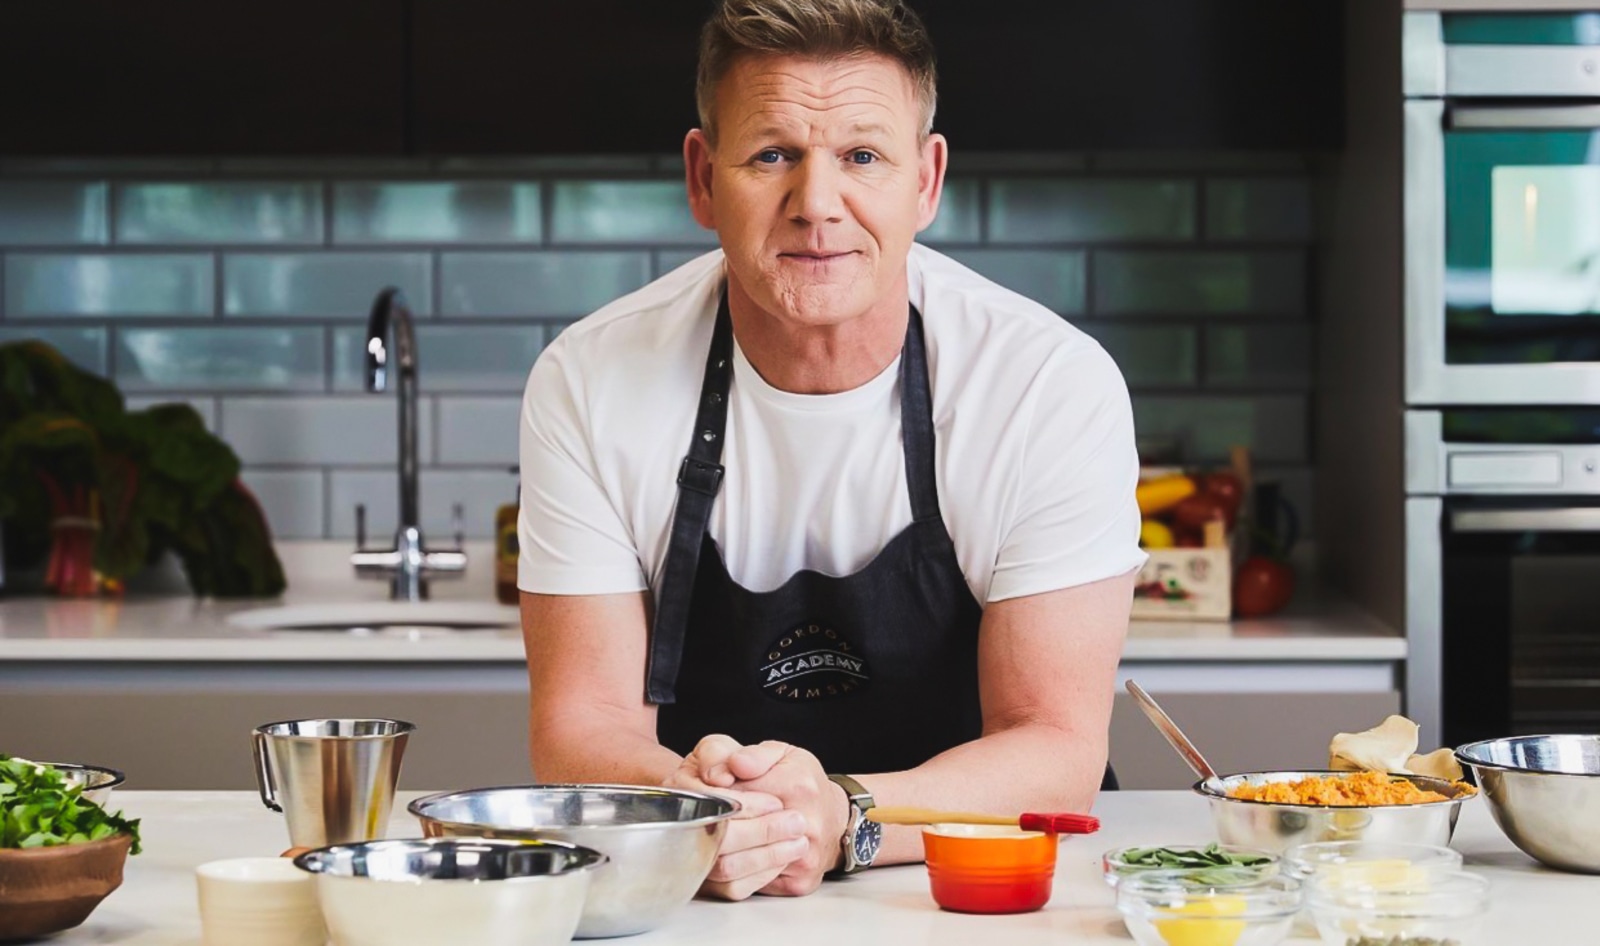 Gordon Ramsay Can't Get Over Vegan Food. His New Recipe Takes on Cauliflower.